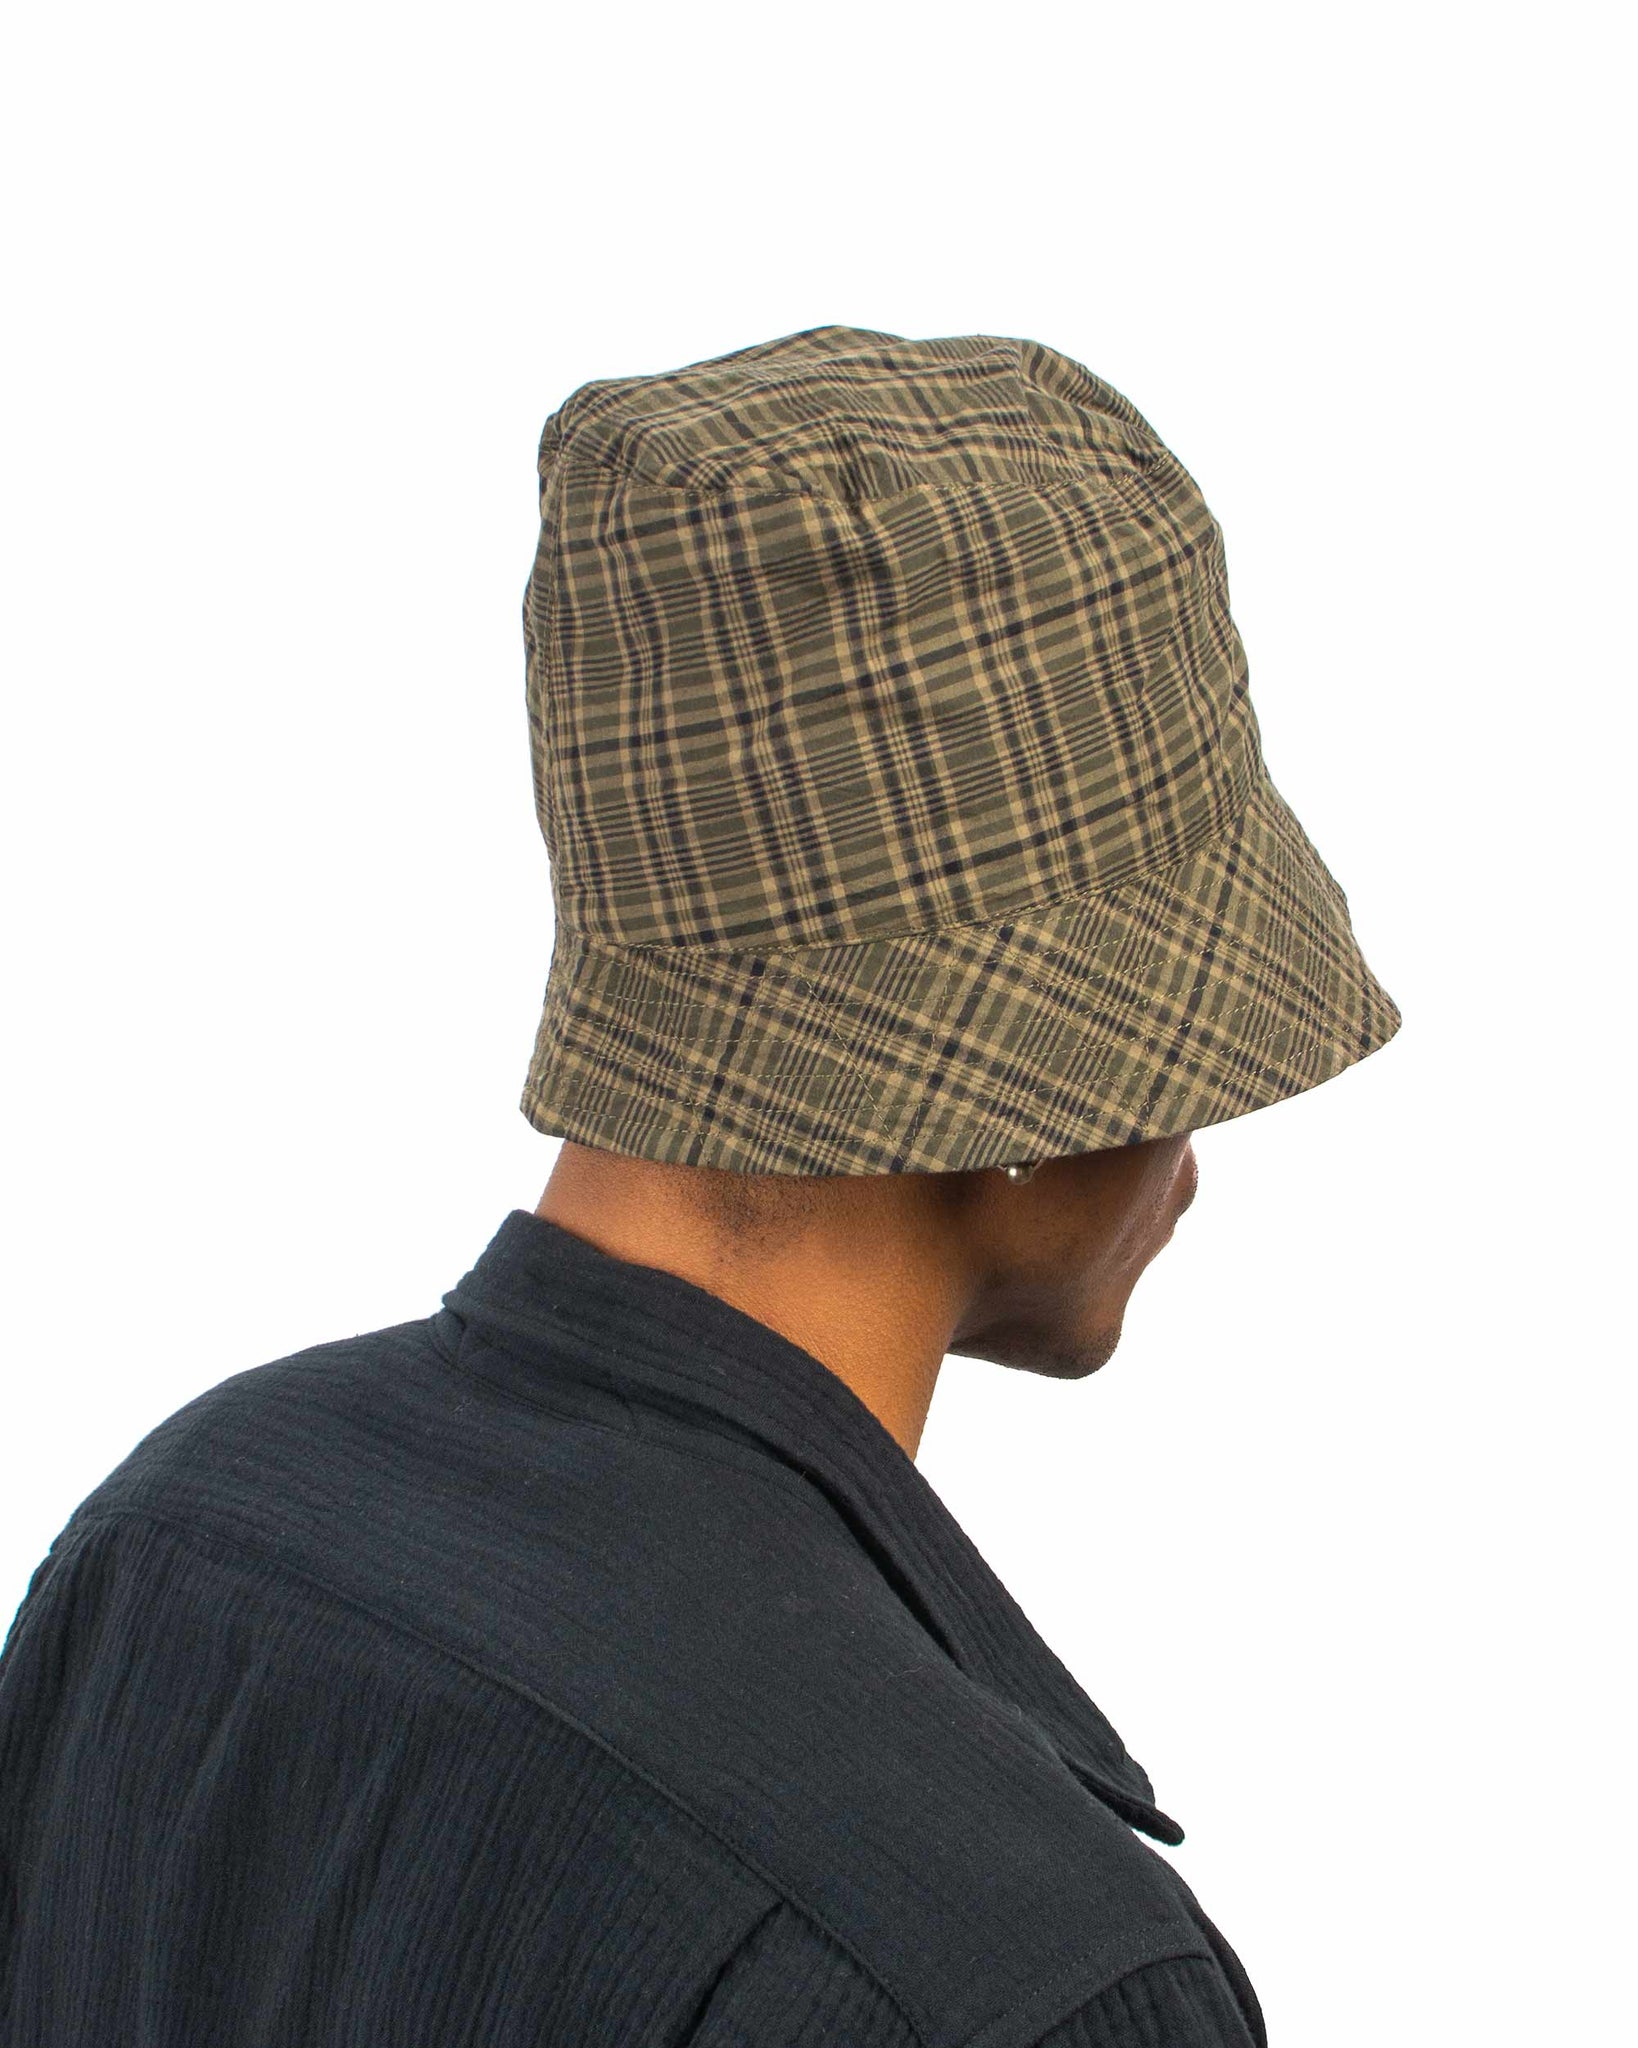 Engineered Garments Bucket Hat Olive Brown Cotton Madras Check Back